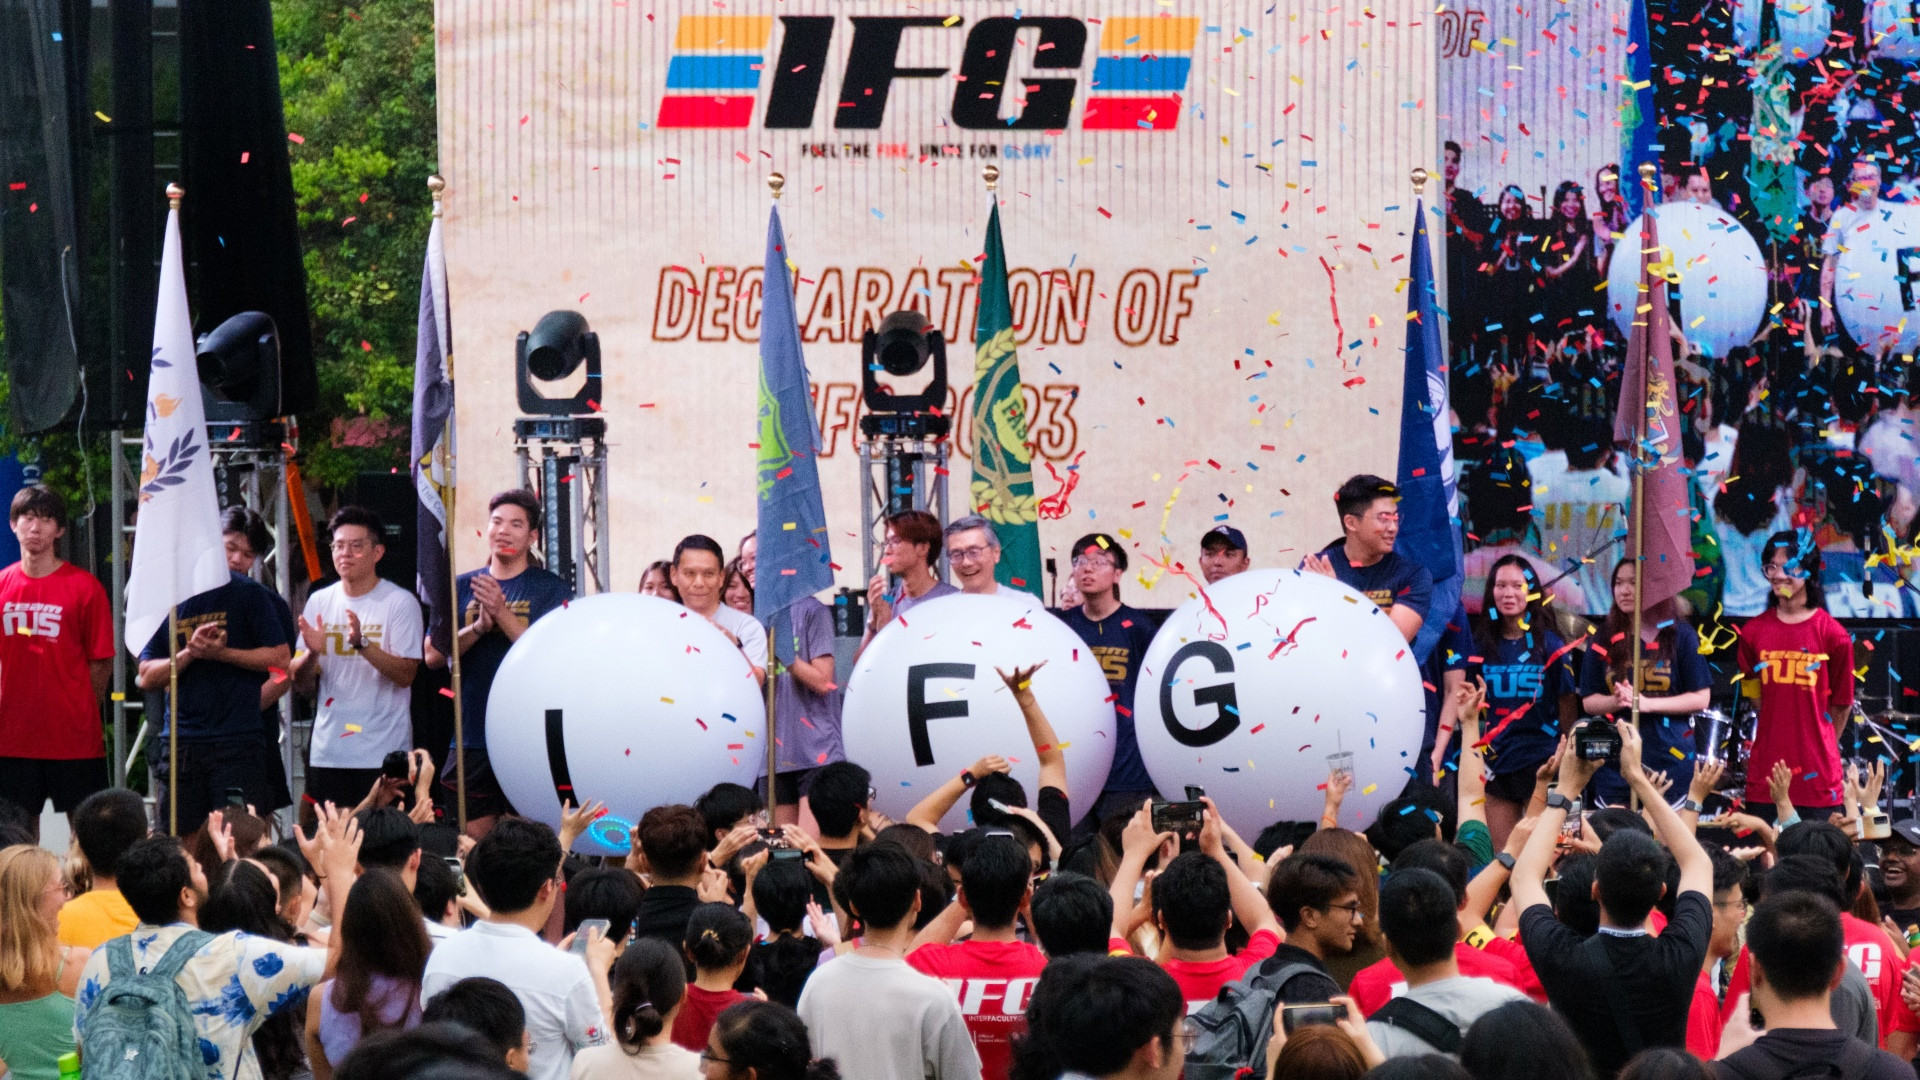 The Inter-Faculty Games (IFG) 2023 was launched by (left to right, with balloons) Dean of Students Assoc Prof Ho Han Kiat, NUS President Prof Tan Eng Chye, and President of NUS Students’ Sports Club Adam Dai.
